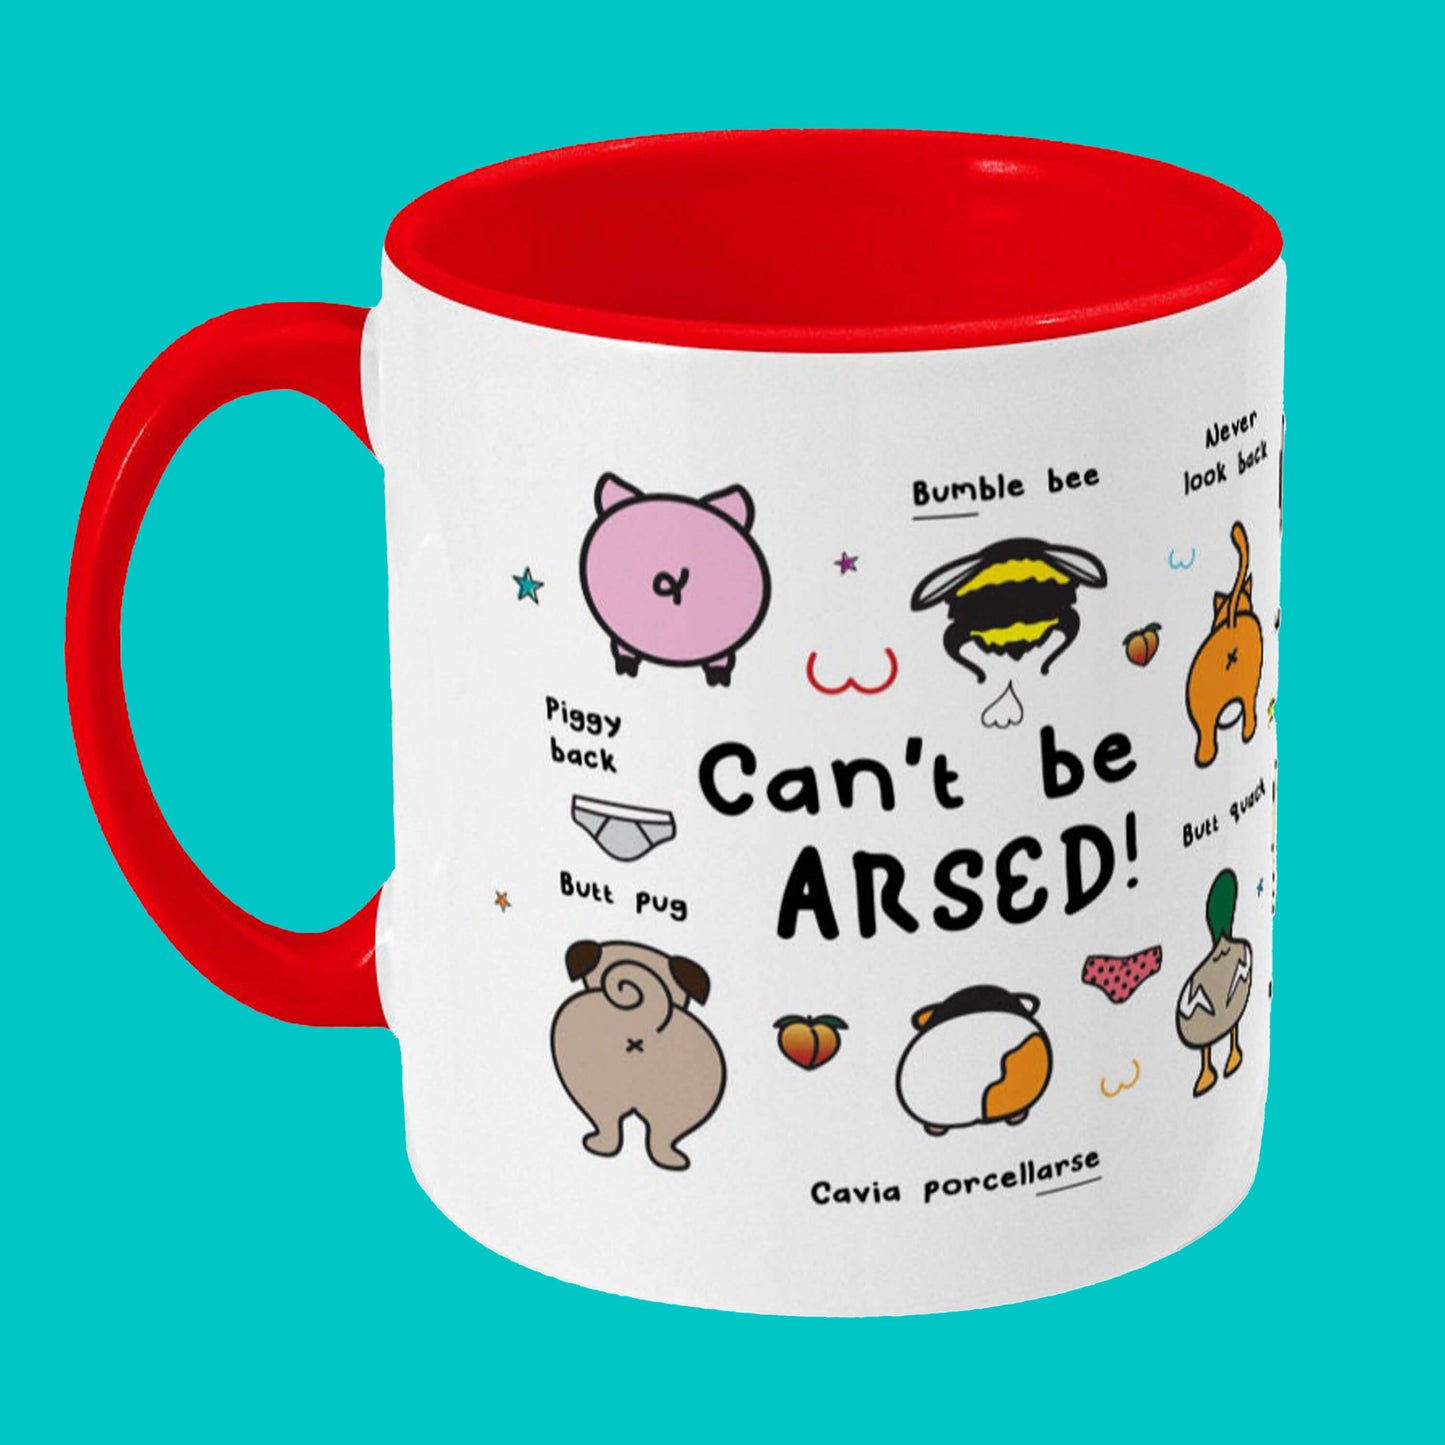 The Can't Be Arsed Mug on a blue background. The white mug with a red handle and inside features various animal bums with underwear, chest outlines, peaches and multicoloured stars. The mug is facing right which shows a pig - piggy back, bumble bee - bum ble bee, pug - butt pug, guinea pig - cavia porcellarse, duck - butt quack and cat - never look back, bums.